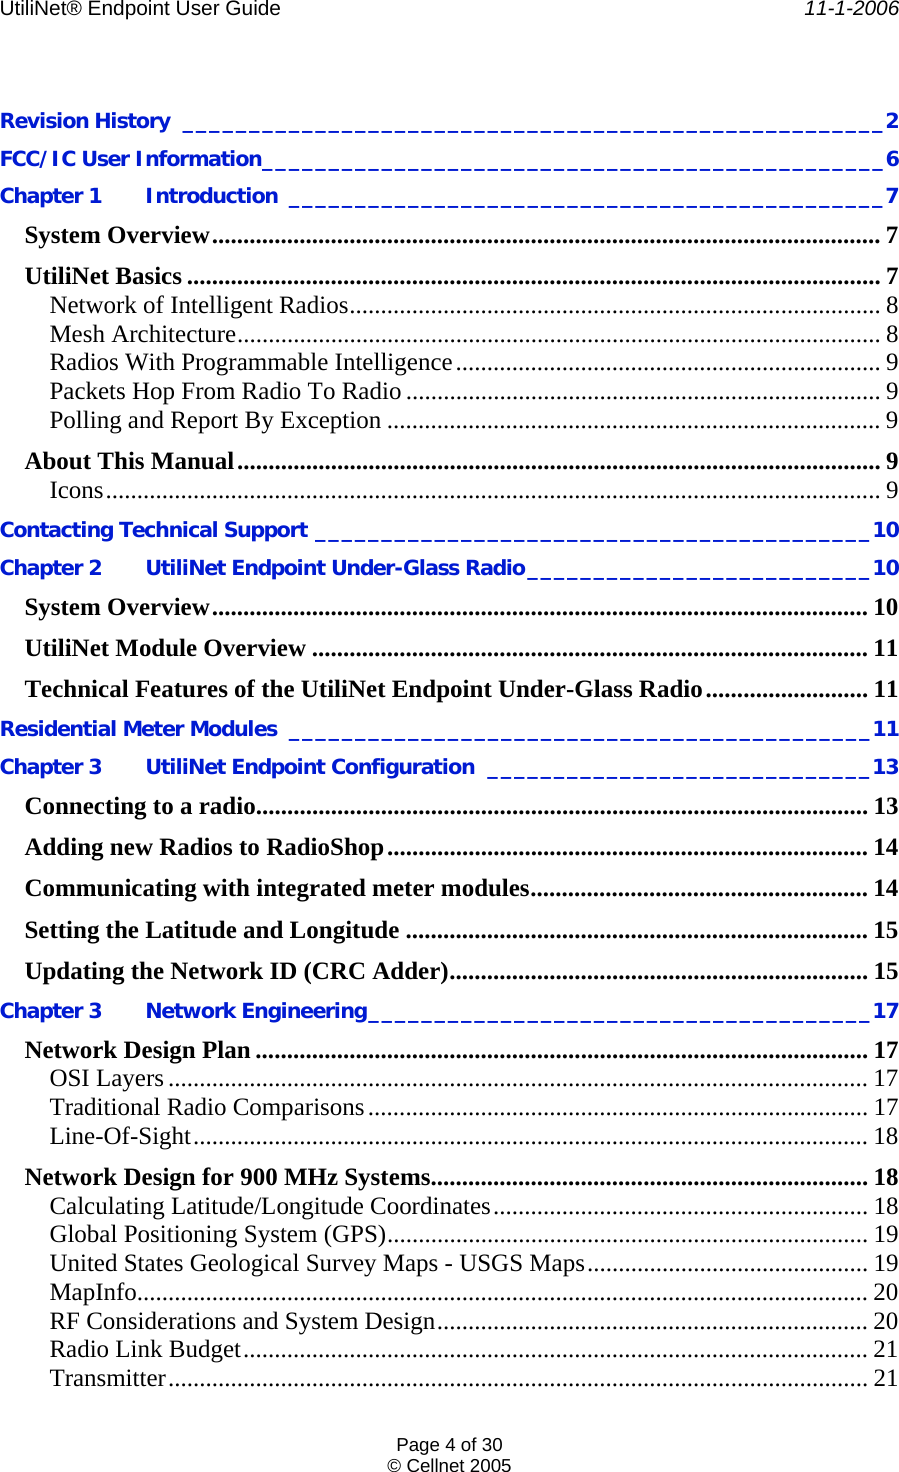 UtiliNet® Endpoint User Guide    11-1-2006 Page 4 of 30 © Cellnet 2005   Revision History _____________________________________________________2 FCC/IC User Information_______________________________________________6 Chapter 1  Introduction _____________________________________________7 System Overview........................................................................................................... 7 UtiliNet Basics ............................................................................................................... 7 Network of Intelligent Radios..................................................................................... 8 Mesh Architecture....................................................................................................... 8 Radios With Programmable Intelligence.................................................................... 9 Packets Hop From Radio To Radio ............................................................................ 9 Polling and Report By Exception ............................................................................... 9 About This Manual....................................................................................................... 9 Icons............................................................................................................................ 9 Contacting Technical Support __________________________________________10 Chapter 2 UtiliNet Endpoint Under-Glass Radio__________________________10 System Overview......................................................................................................... 10 UtiliNet Module Overview ......................................................................................... 11 Technical Features of the UtiliNet Endpoint Under-Glass Radio.......................... 11 Residential Meter Modules ____________________________________________11 Chapter 3 UtiliNet Endpoint Configuration _____________________________13 Connecting to a radio.................................................................................................. 13 Adding new Radios to RadioShop............................................................................. 14 Communicating with integrated meter modules...................................................... 14 Setting the Latitude and Longitude .......................................................................... 15 Updating the Network ID (CRC Adder)................................................................... 15 Chapter 3  Network Engineering______________________________________17 Network Design Plan .................................................................................................. 17 OSI Layers ................................................................................................................ 17 Traditional Radio Comparisons................................................................................ 17 Line-Of-Sight............................................................................................................ 18 Network Design for 900 MHz Systems...................................................................... 18 Calculating Latitude/Longitude Coordinates............................................................ 18 Global Positioning System (GPS)............................................................................. 19 United States Geological Survey Maps - USGS Maps............................................. 19 MapInfo..................................................................................................................... 20 RF Considerations and System Design..................................................................... 20 Radio Link Budget.................................................................................................... 21 Transmitter................................................................................................................ 21 